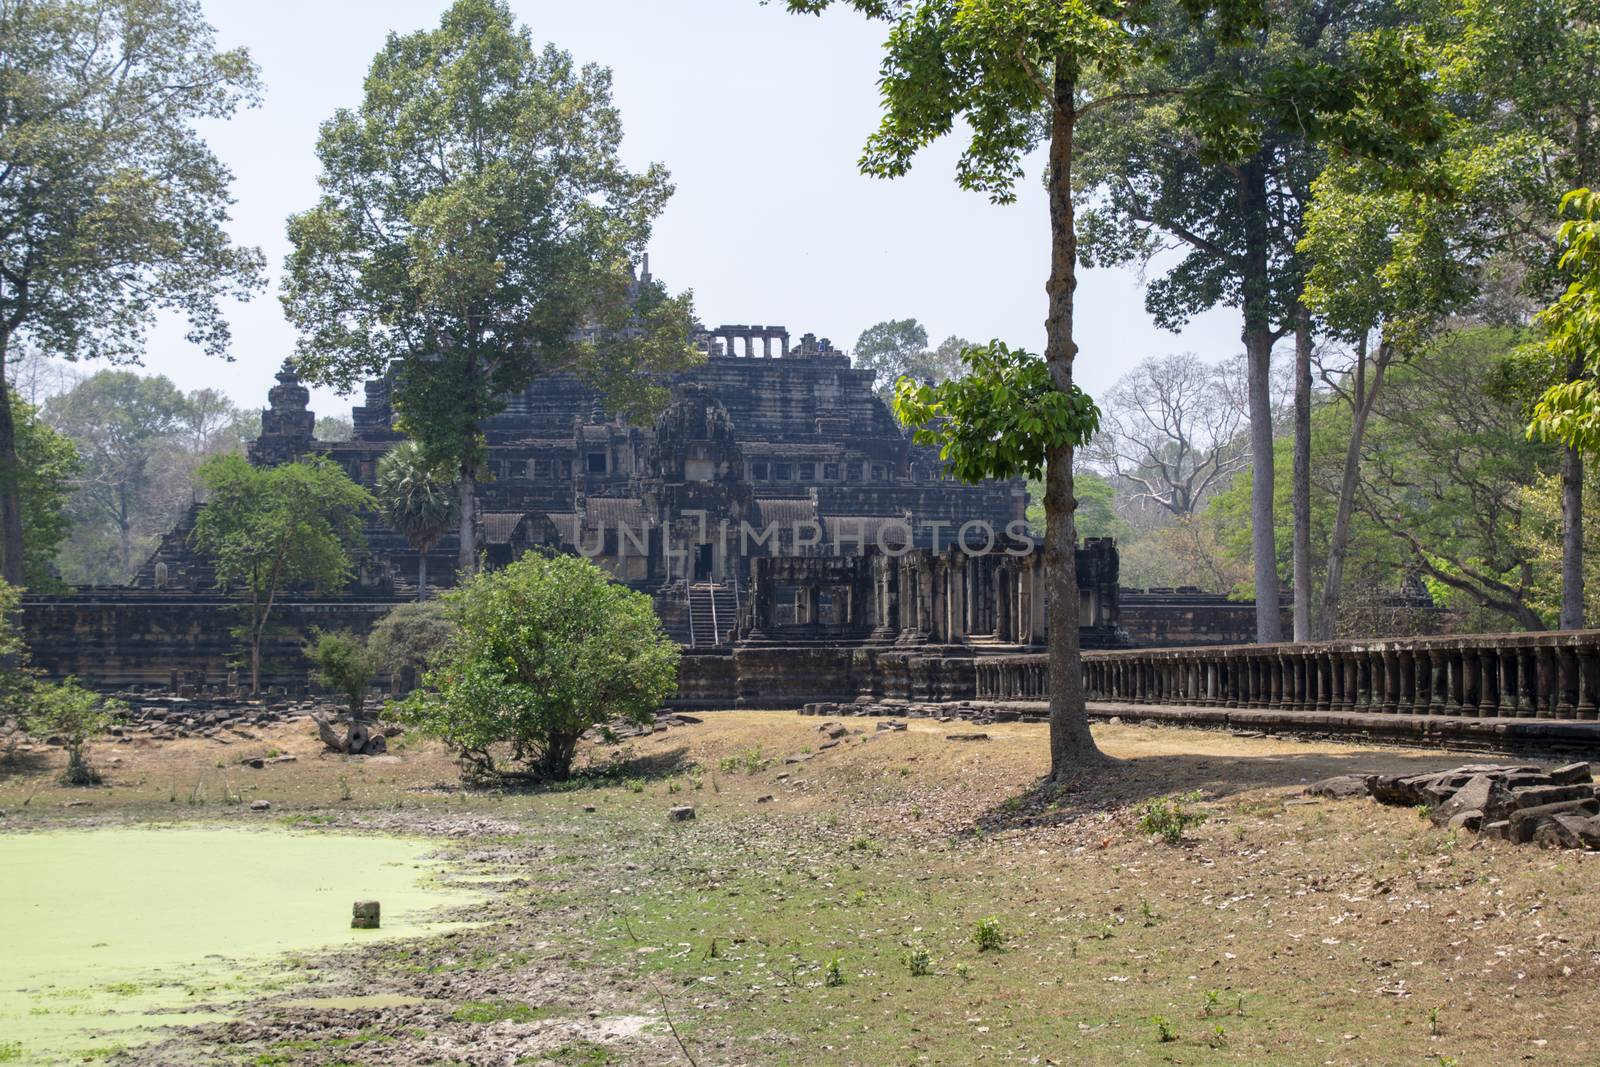 Angkor Thom, Cambodia, March 2016: Stone causeway supported by many finely carved columns, providing an impressive entrance to the Baphuon temple mountain.